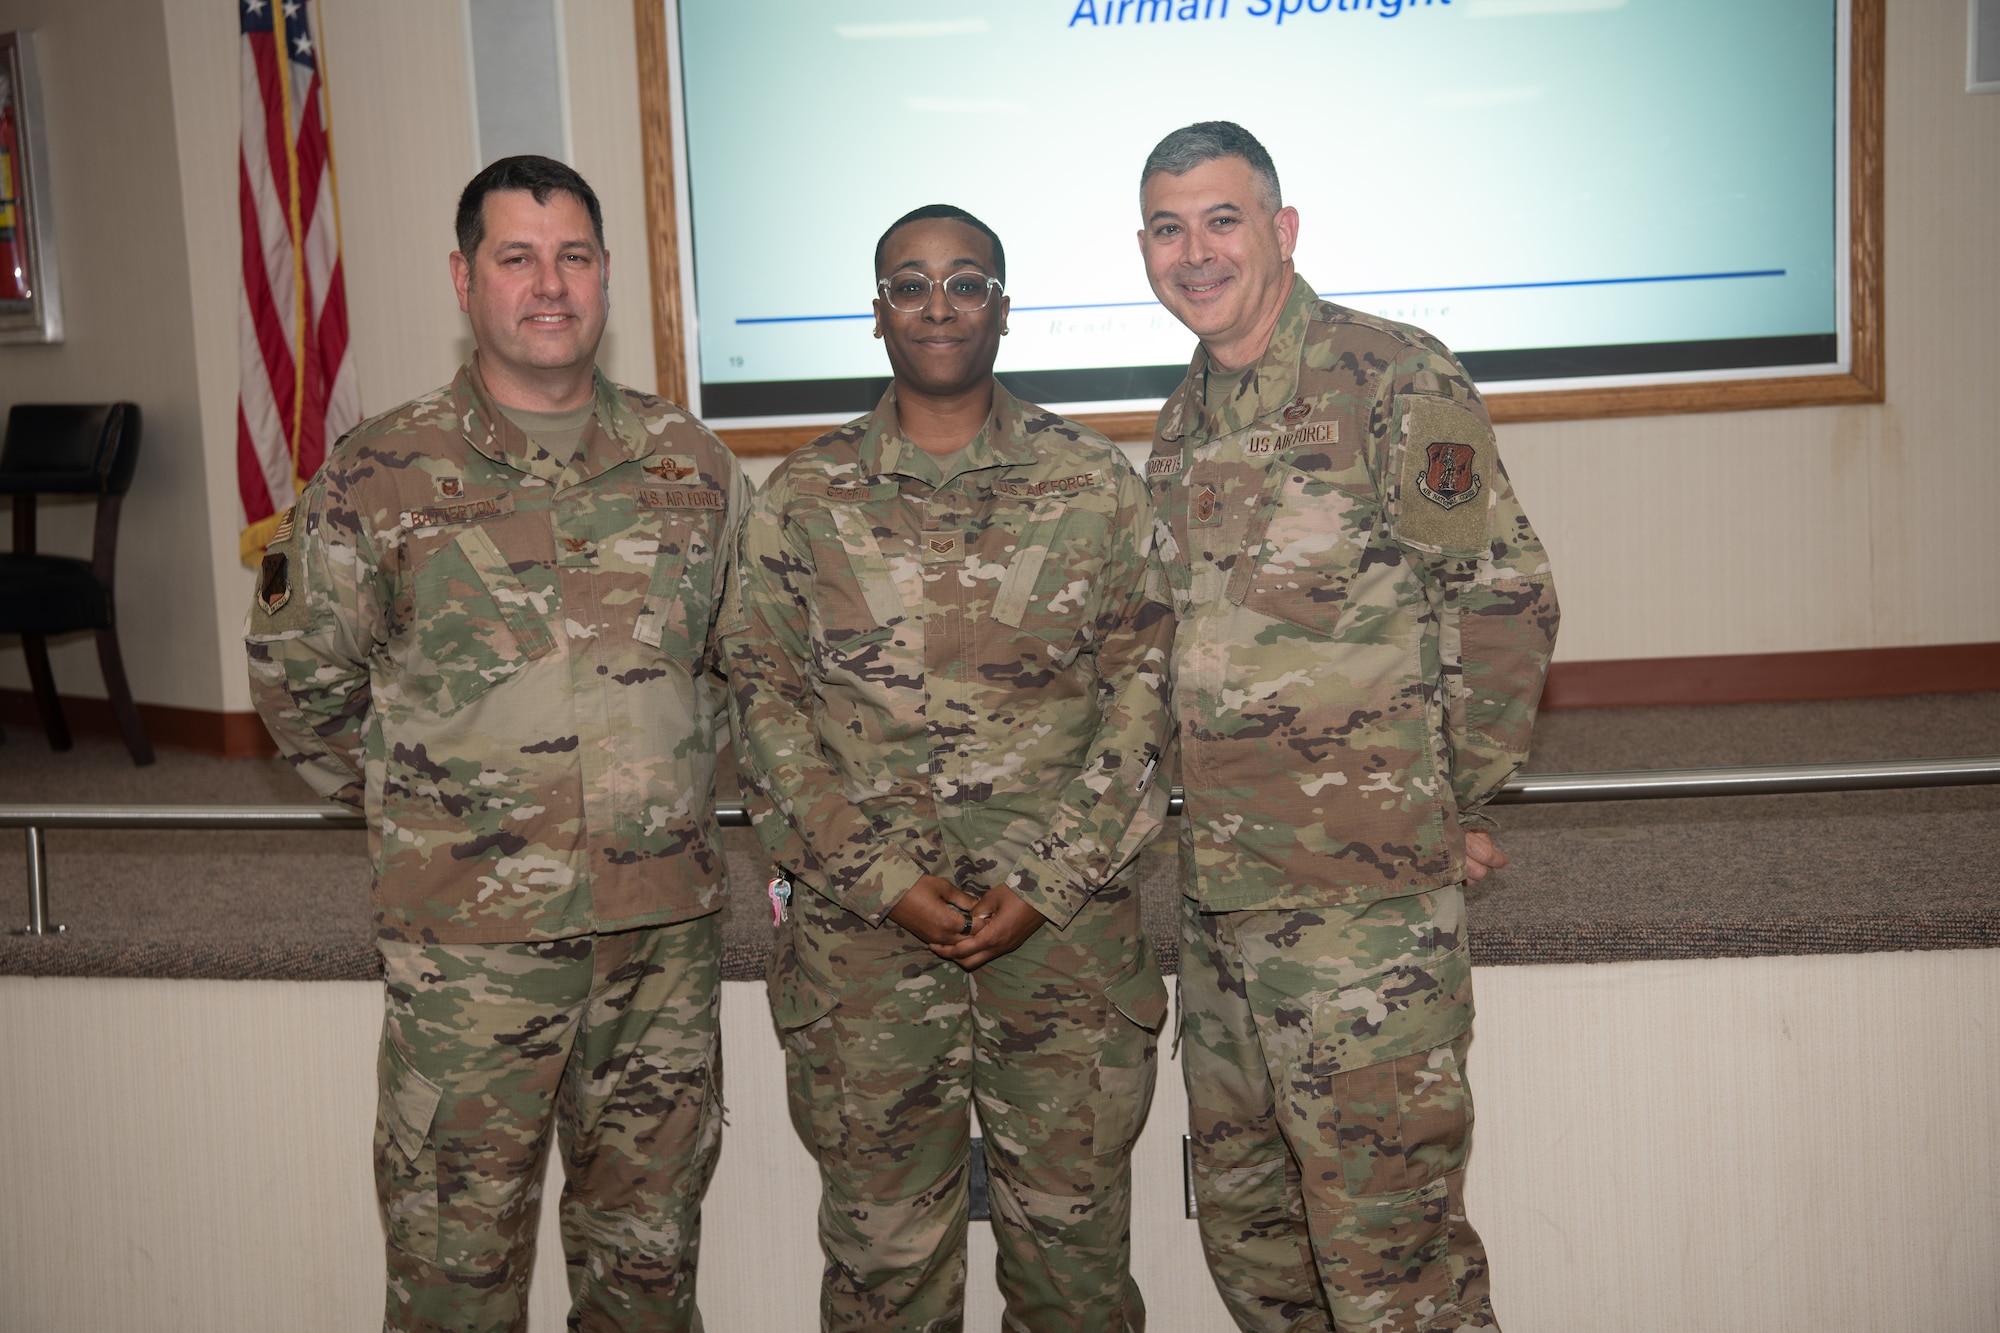 From left, Col. Christopher G. Batterton, 192nd Wing commander, Staff Sgt. Victoria Griffin, 203rd RED HORSE, and Chief Master Sgt. Richard Roberts, 192nd Wing command chief, pose for a photo.